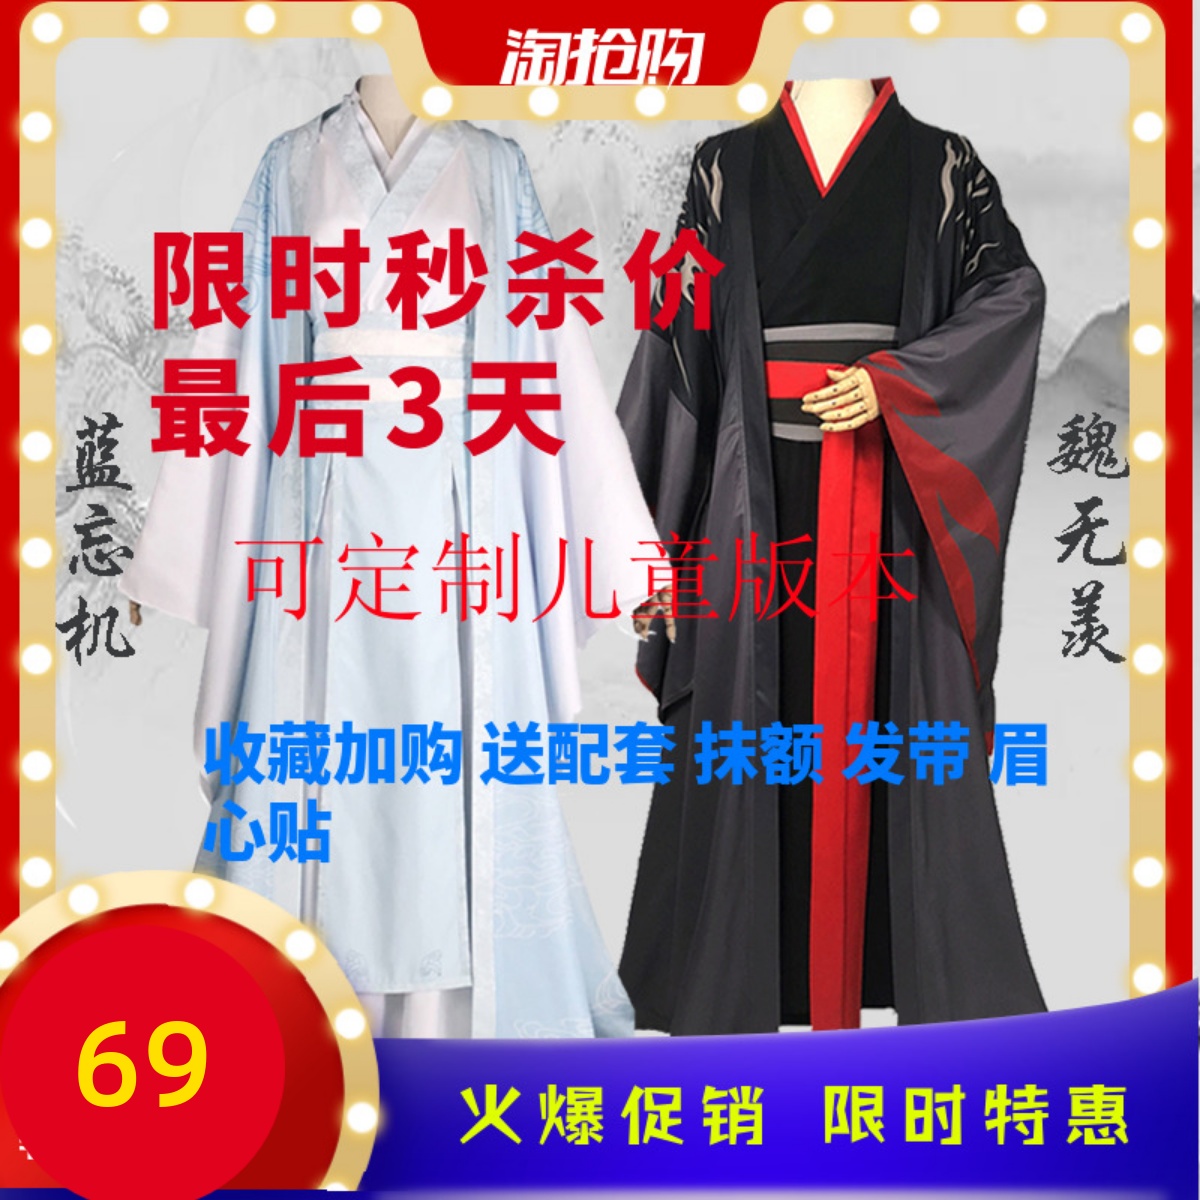 Wei Wuxian cos clothes Yiling ancestors blue forget machine Cosplay ancient Chinese clothes boots wig forget envy clothing set